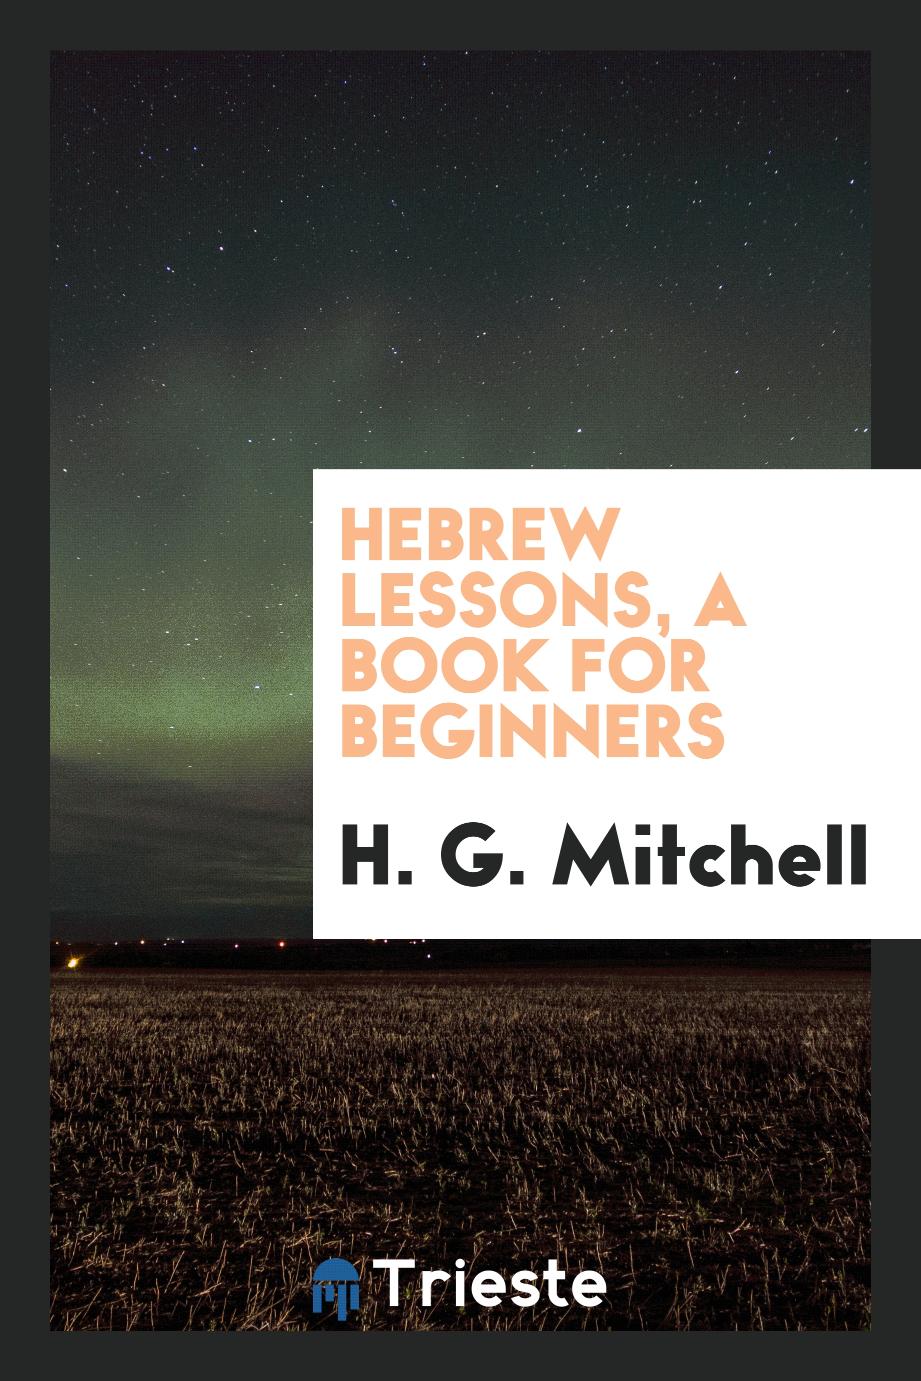 Hebrew lessons, a book for beginners